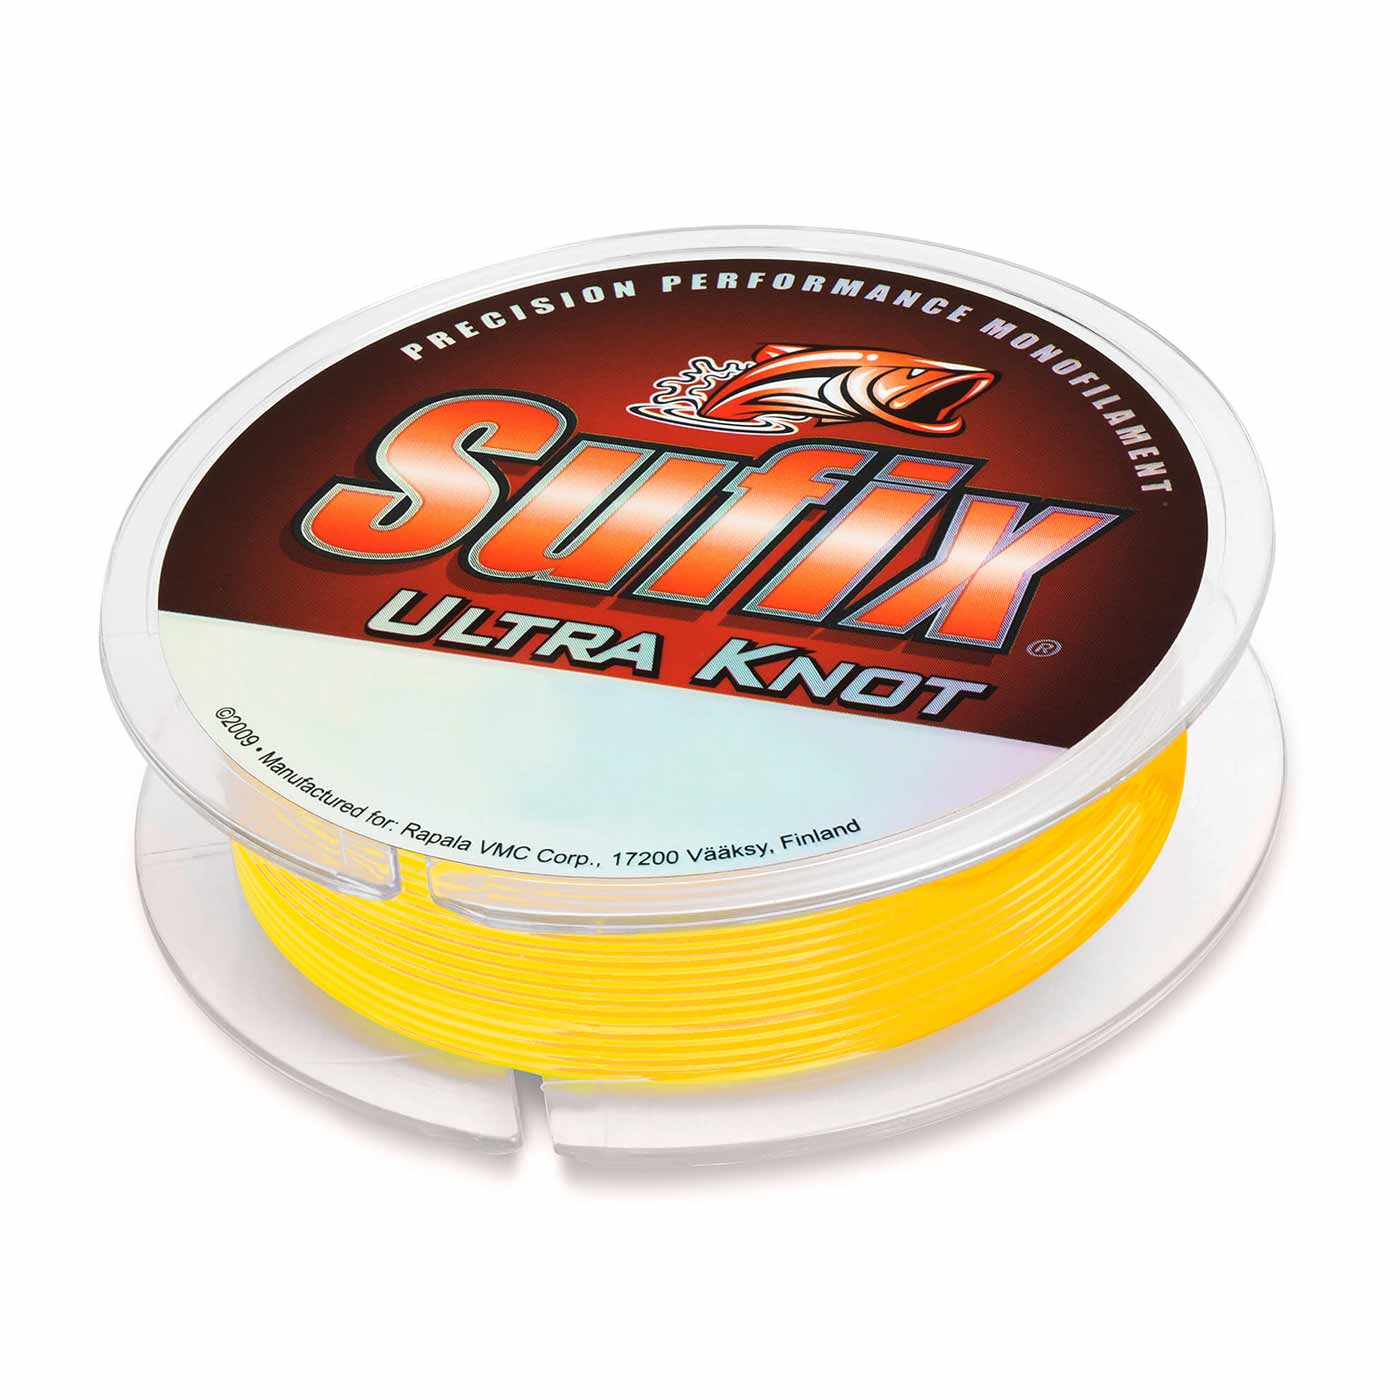 Sufix Ultra Knot Opaque Yellow 0,30mm 7,2kg 1195m